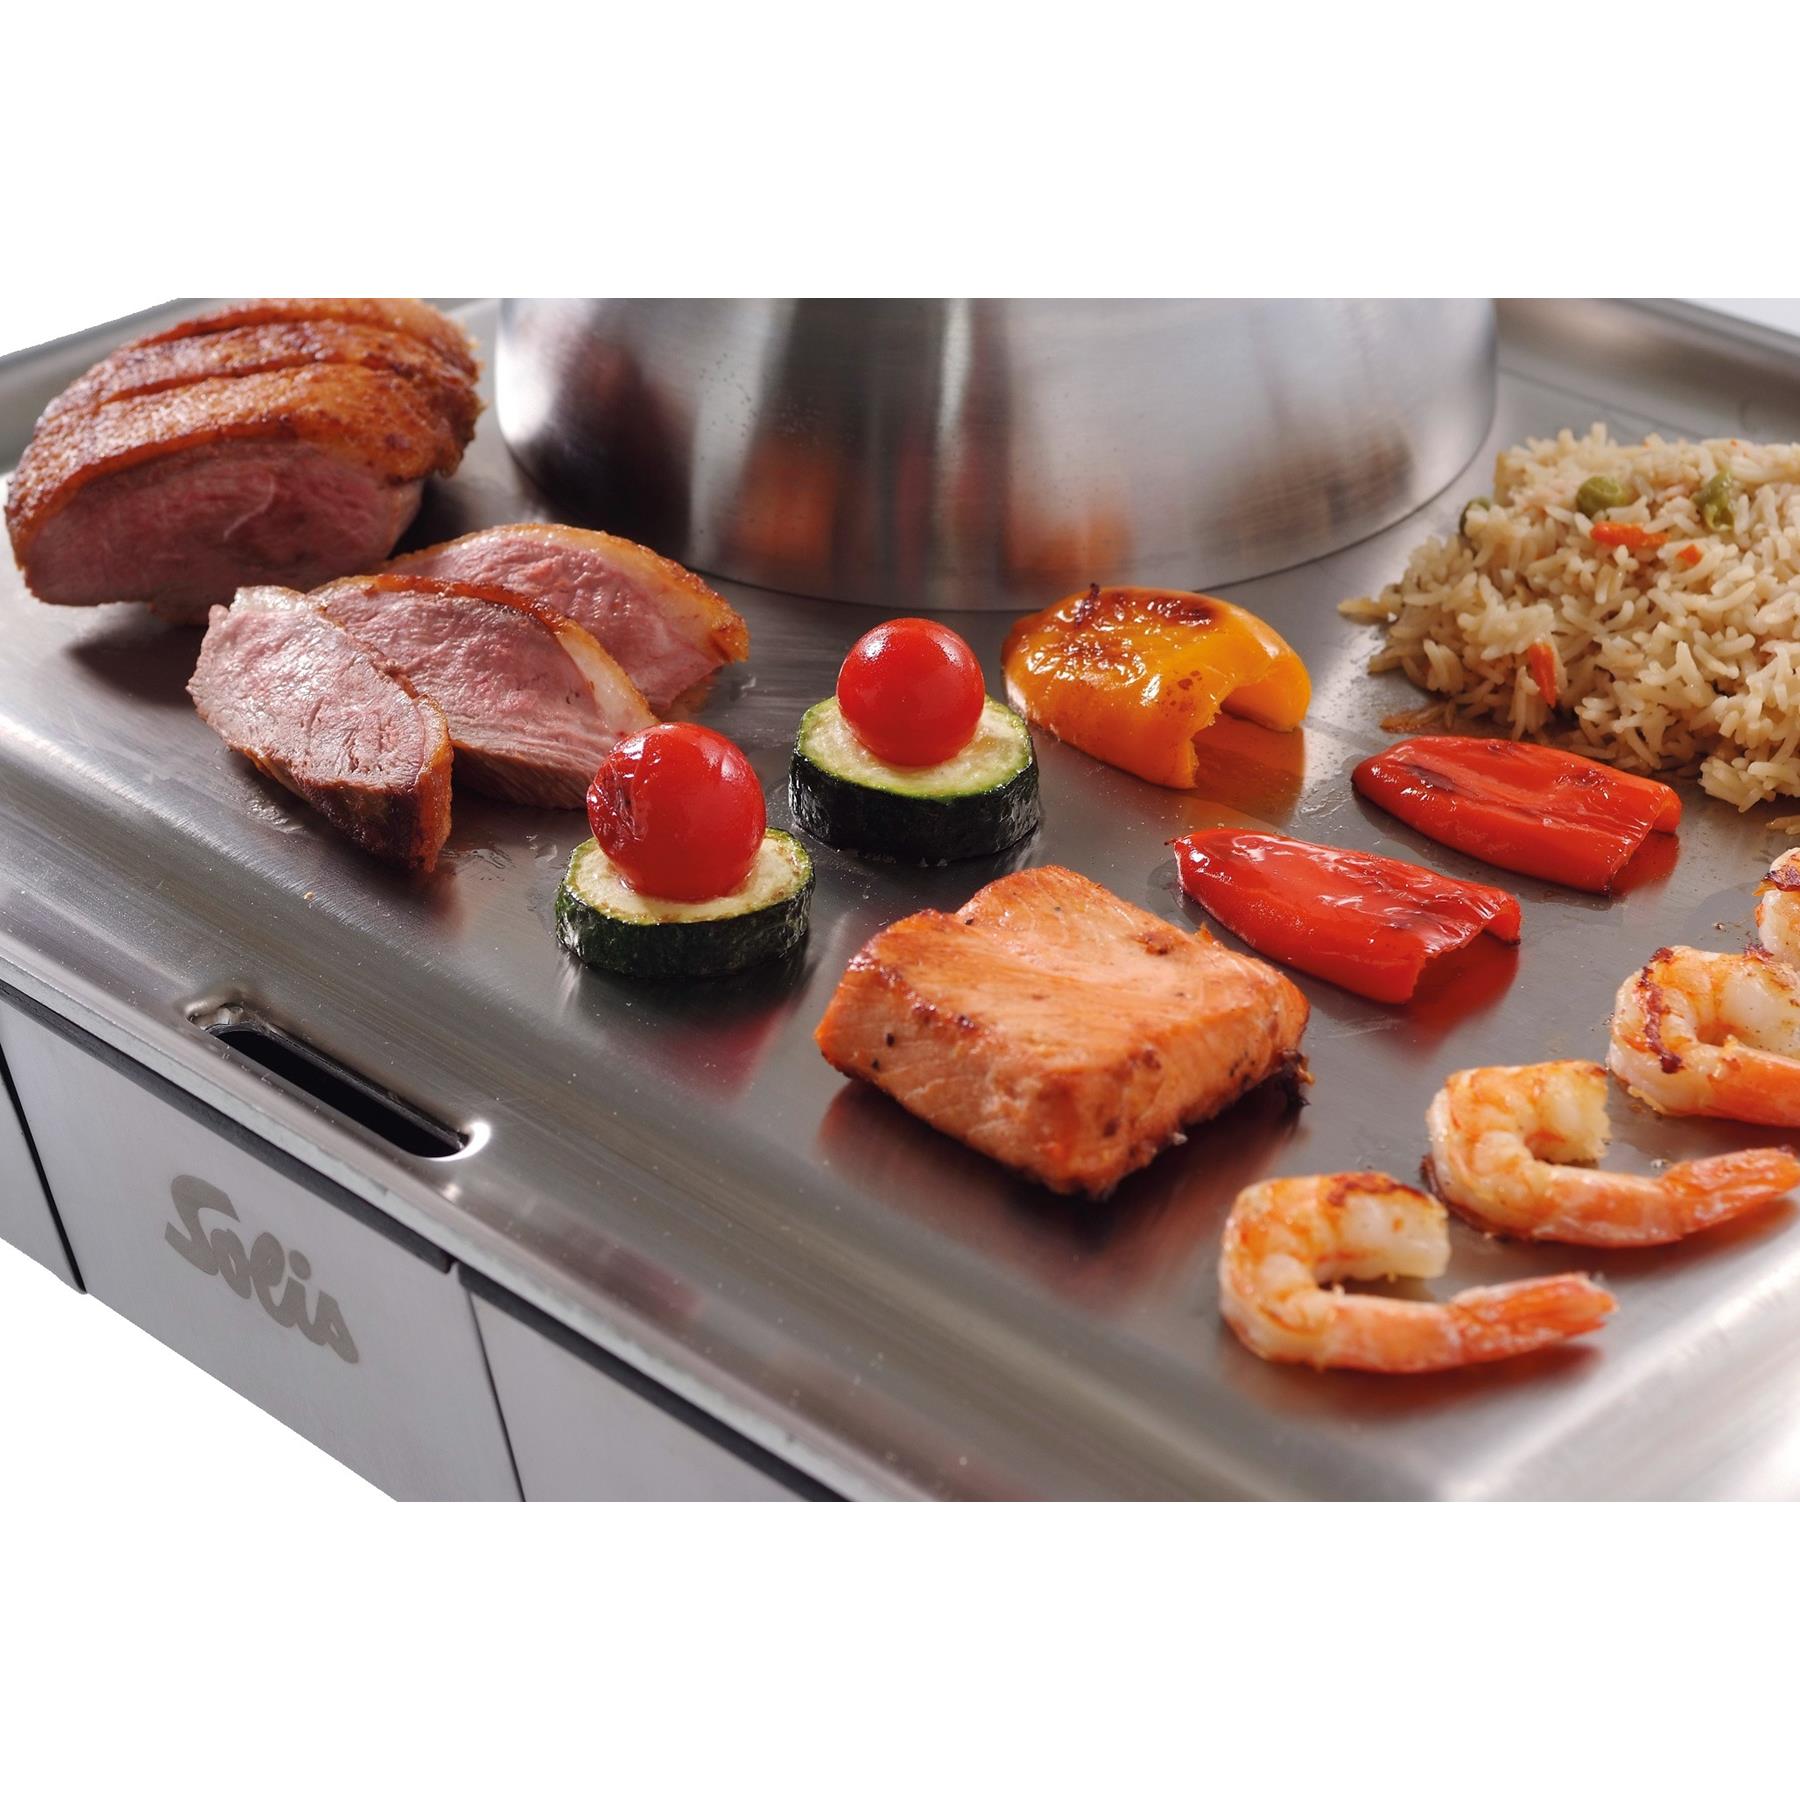 Vegetables and Spanish Plancha Dishes Solis Teppanyaki@Home 795 Teppanyaki Grill Scratch Safe Griddle Plate 49 x 39cm Japanese Grill Meat Electric Grill 